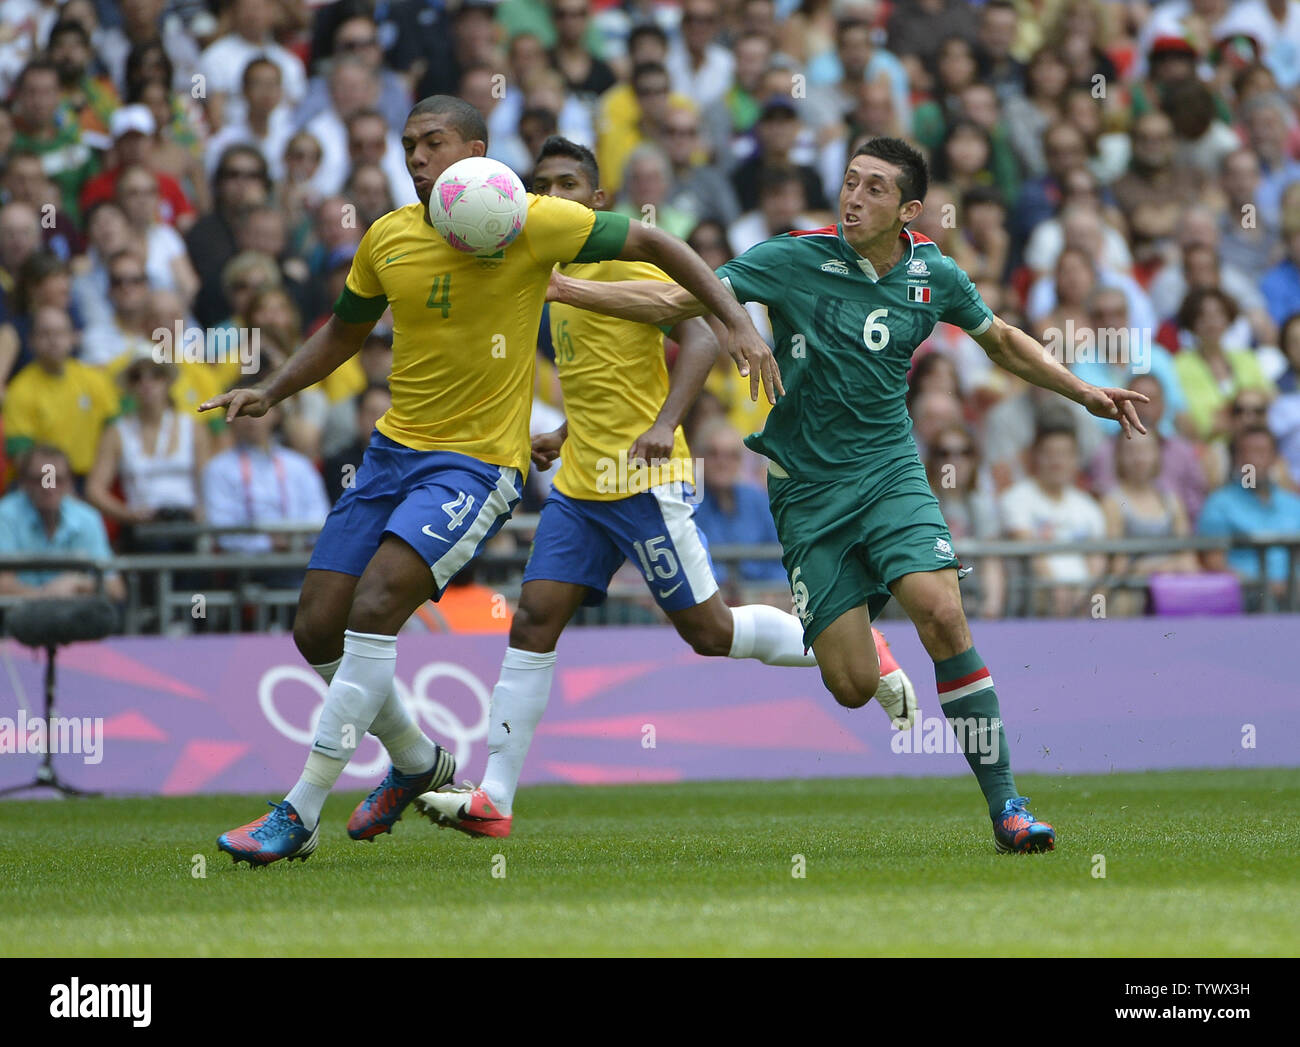 Defender Juan Jesus of Brazil (L) and midfielder Hector Herrera of Mexico go for the ball during the first half of the Gold Medal Football Match at the London 2012 Summer Olympics on August 11, 2012 at Wembley Stadium, London.      UPI/Brian Kersey Stock Photo